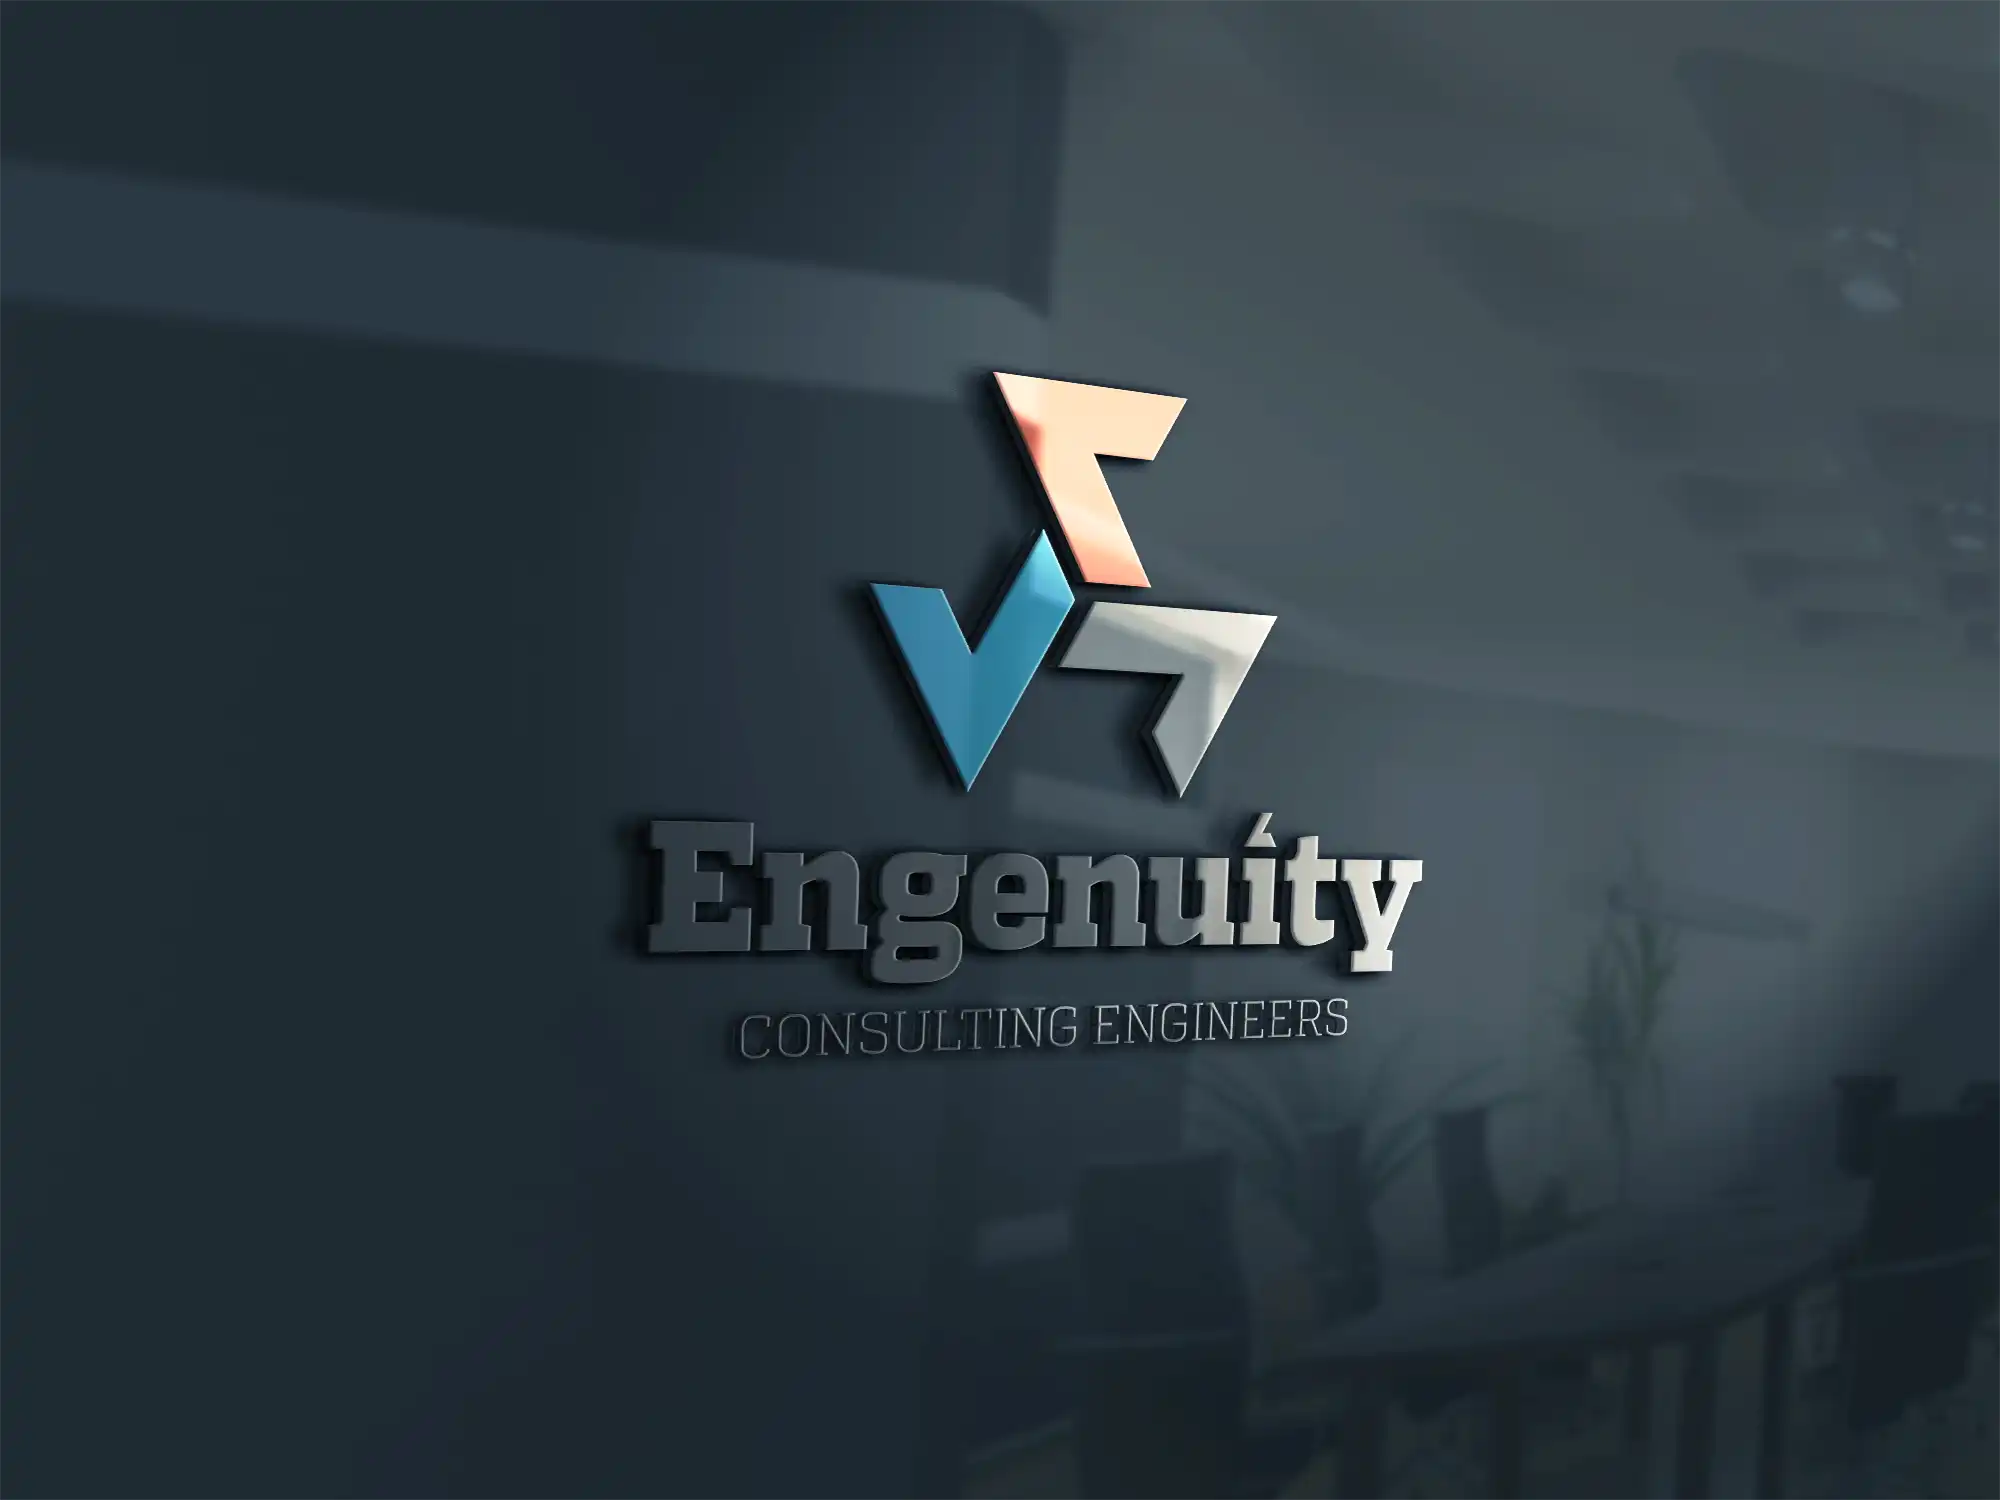 Logo Making made easy for Engenuity Consulting Engineers in West Melton, South West of Christchucrh, Selwyn Canterbury, NZ. A modern elegant engineering-tech-like friendly styled Logo Design made by XDC.NZ, the super experienced, specialist Logo Designer based in Rolleston Selwyn NZ